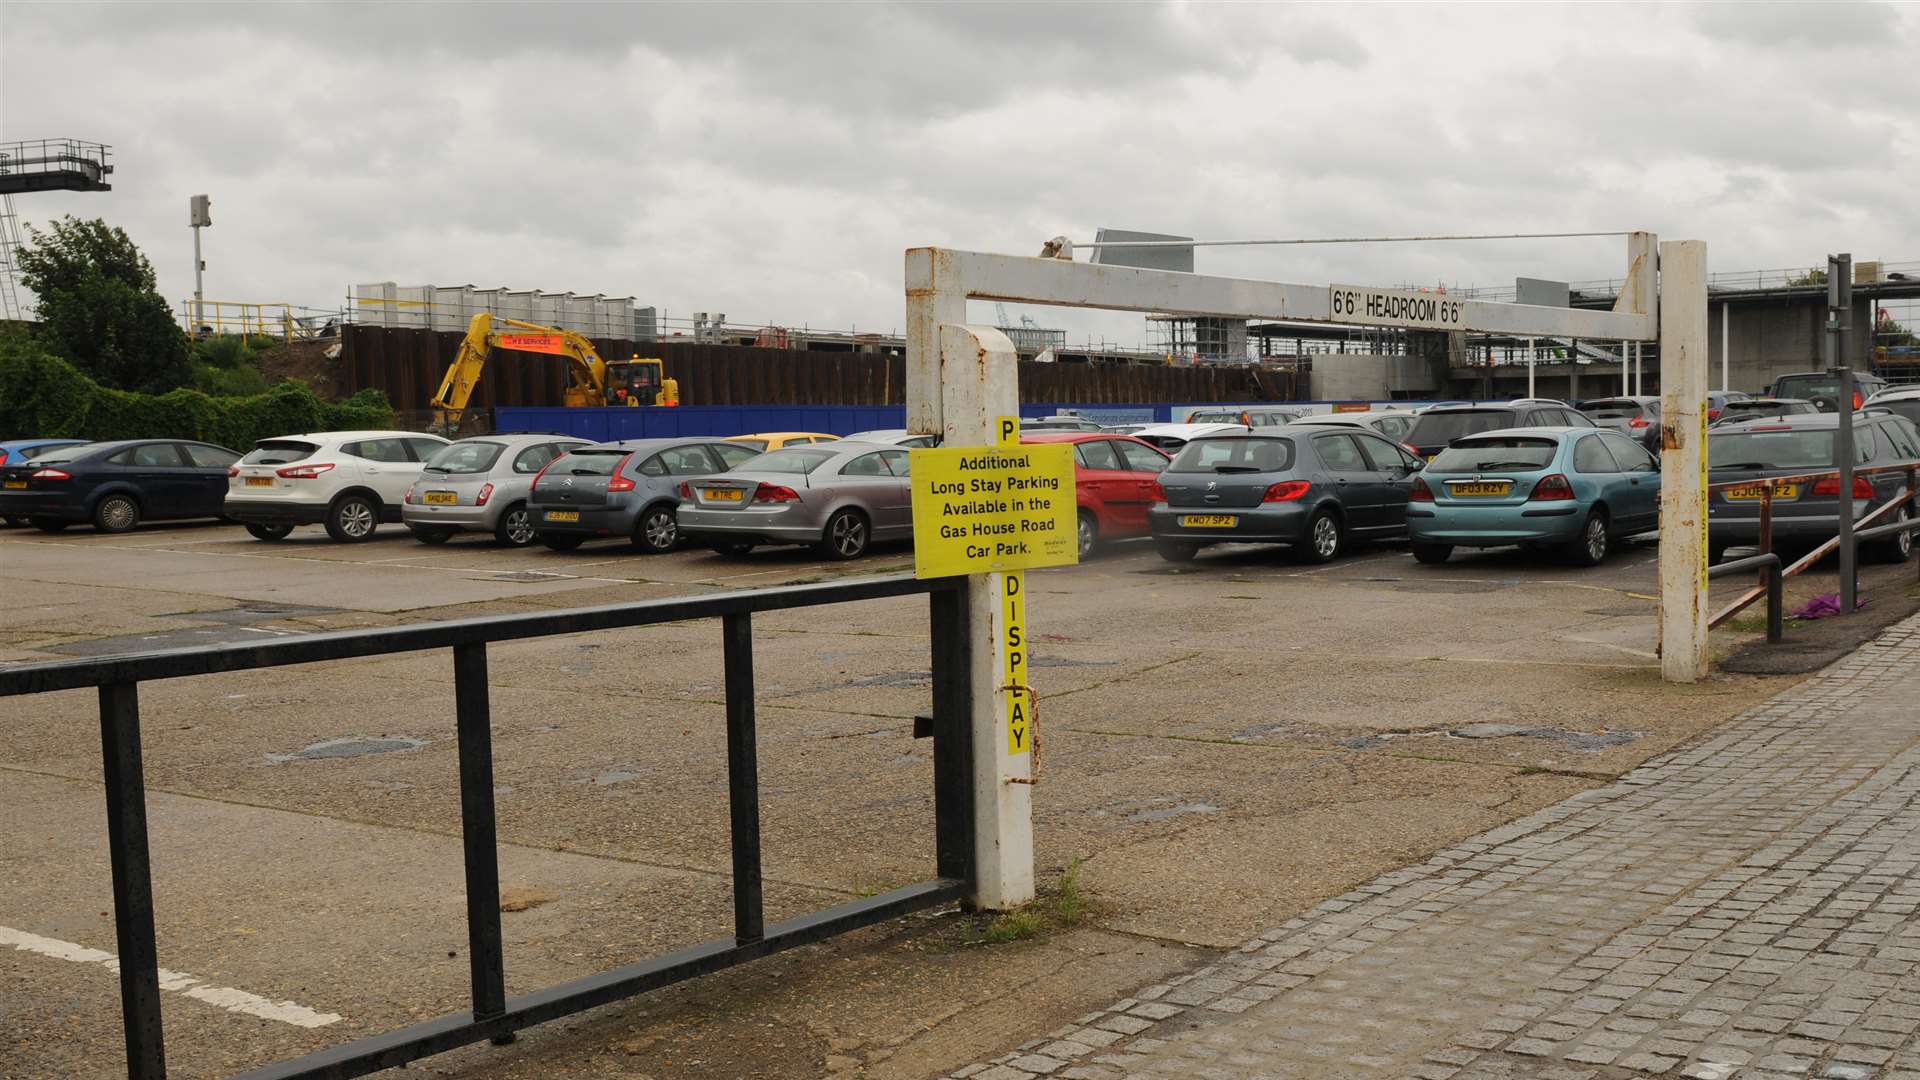 The car park will be closed for the next eight weeks.